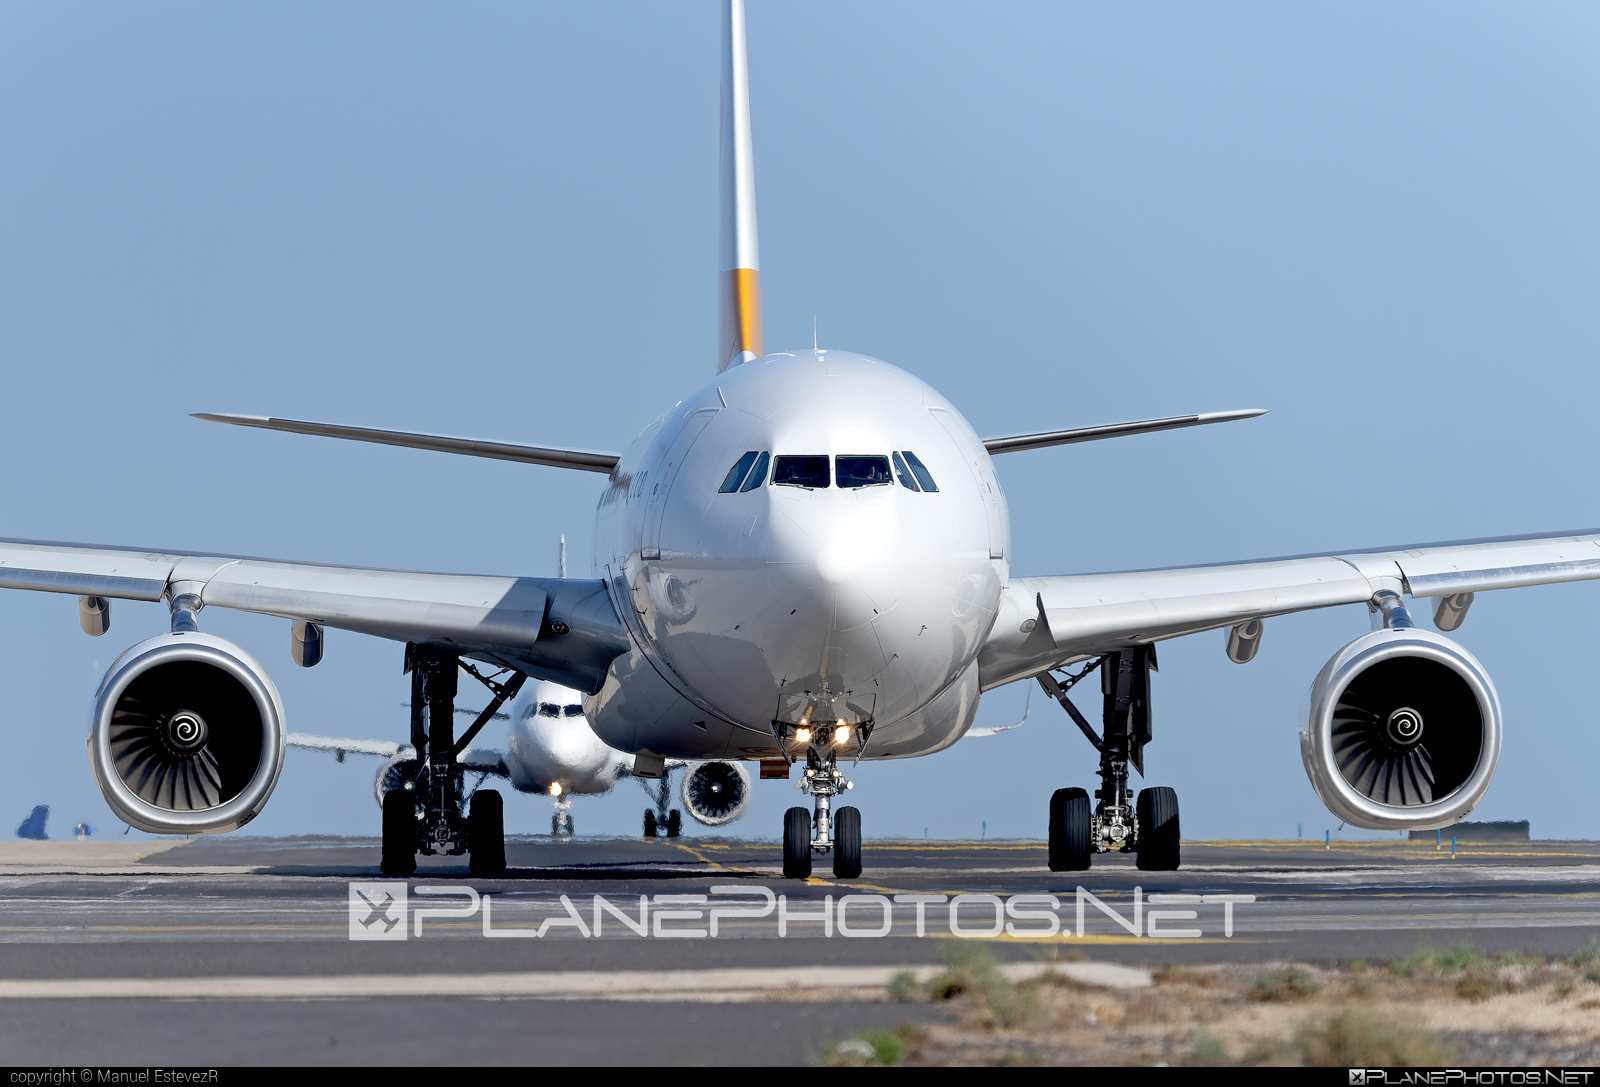 Airbus A330-243 - OY-VKF operated by Sunclass Airlines #SunclassAirlines #a330 #a330family #airbus #airbus330